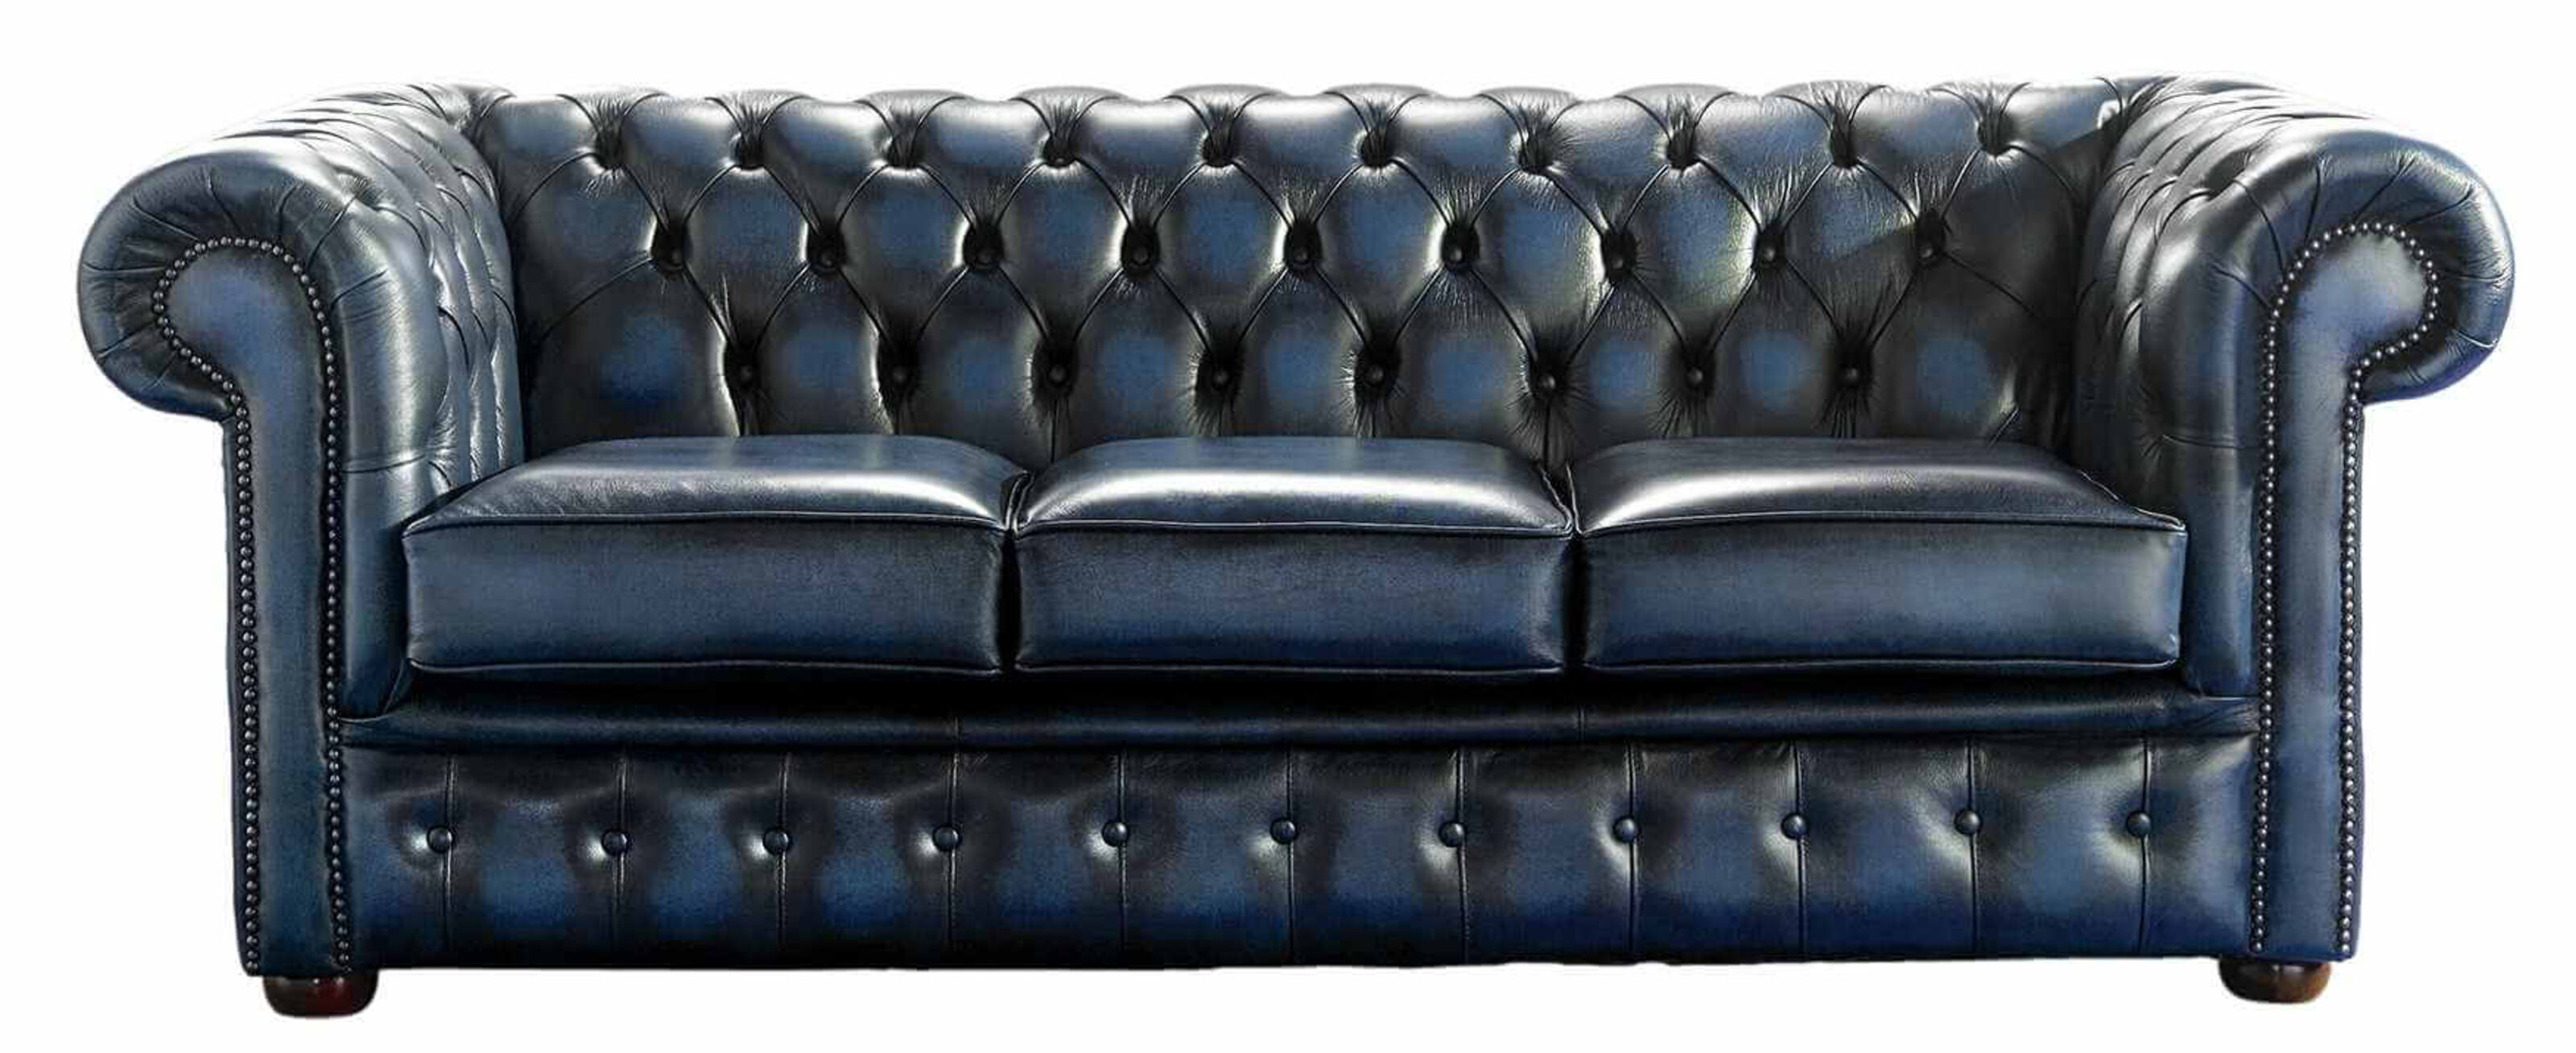 Classic Comfort Creative Decor Ideas for Chesterfield Sofas  %Post Title